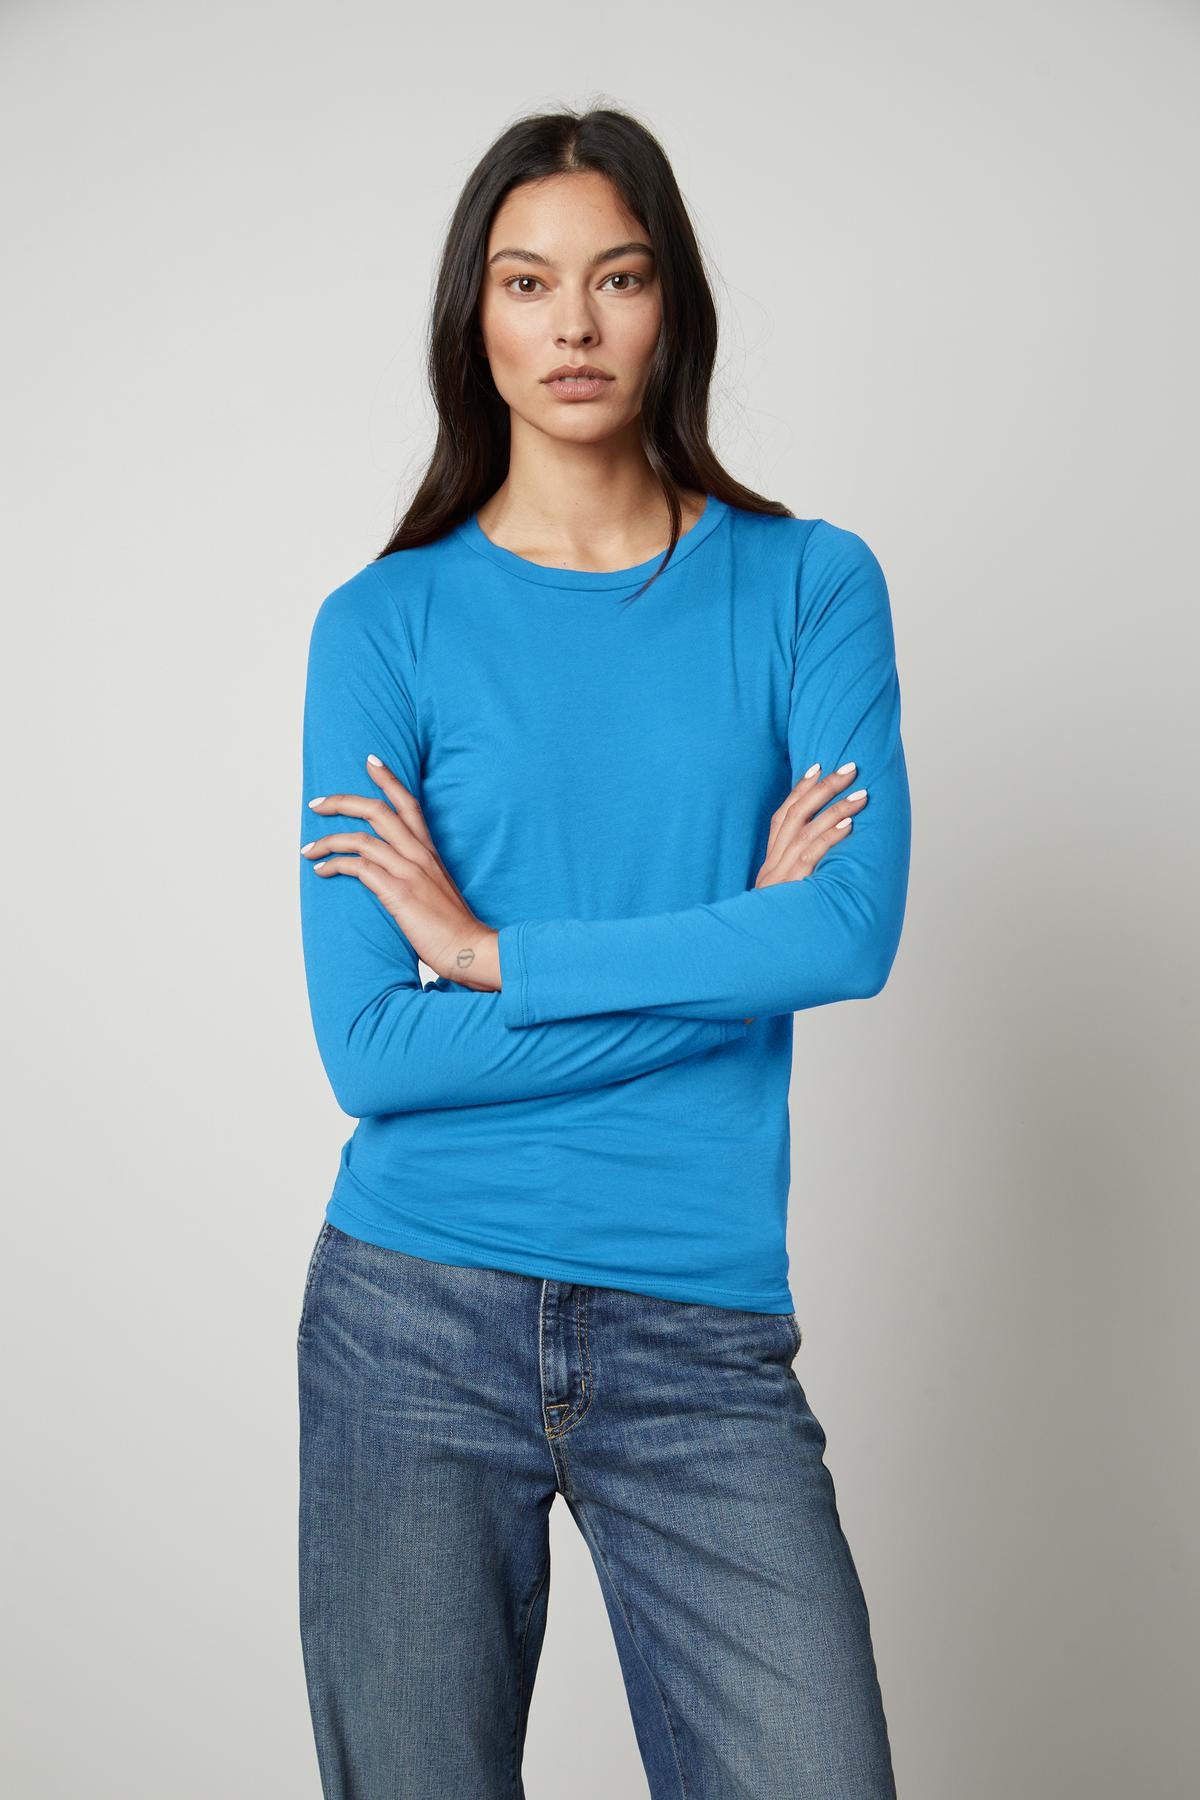 A woman wearing a Velvet by Graham & Spencer ZOFINA GAUZY WHISPER FITTED CREW NECK TEE - perfection.-35503495282881